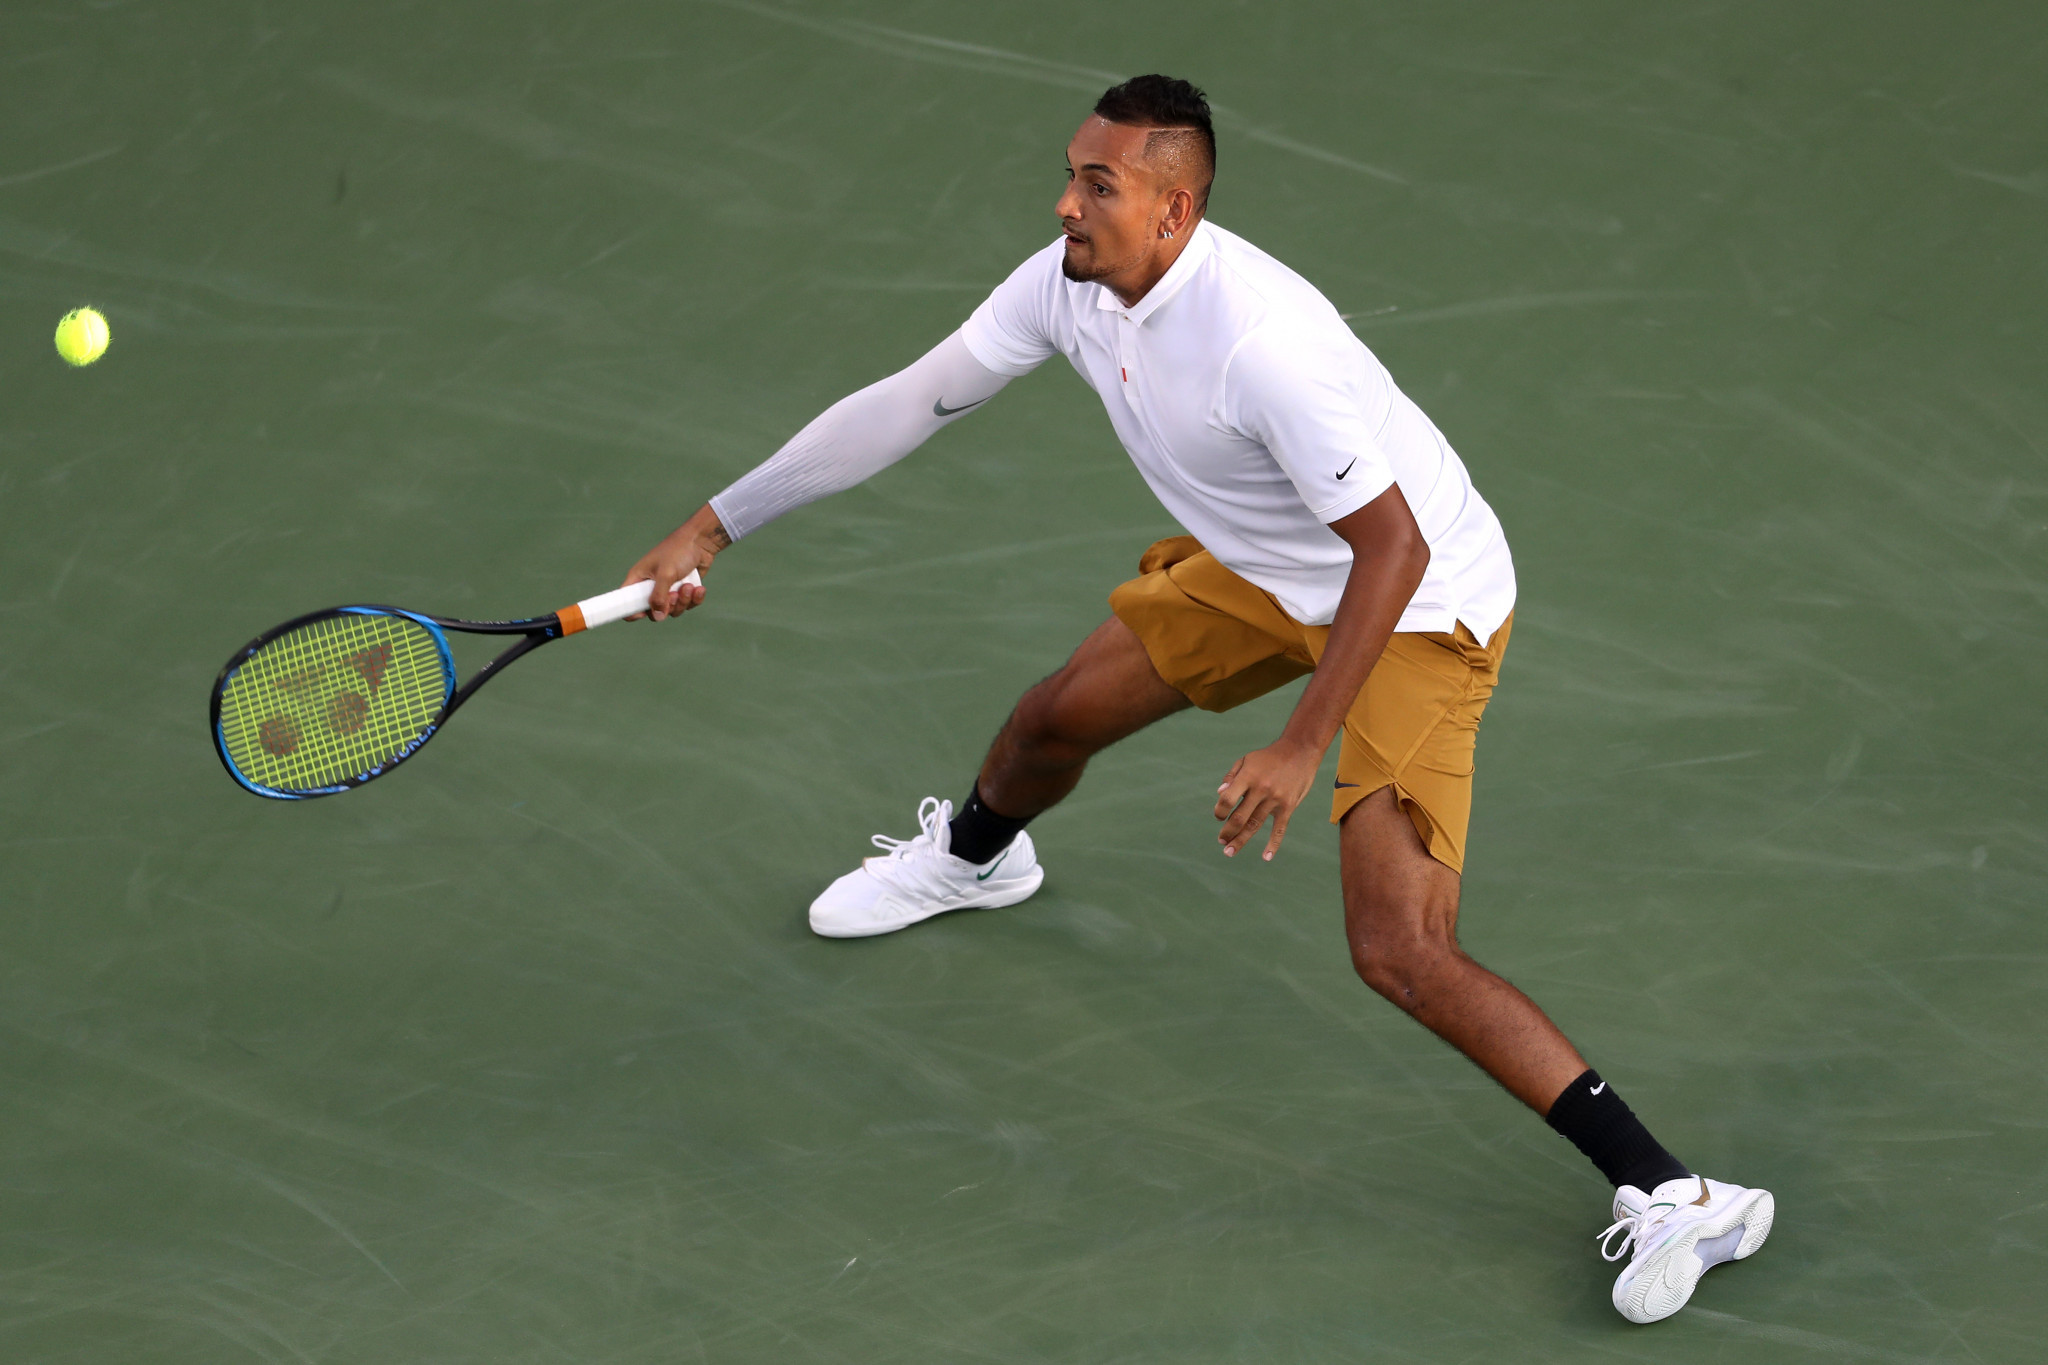 Australian Nick Kyrgios crashed out of Cincinnati Masters against Russian Karen Khachanov - but did not go quietly ©Getty Images